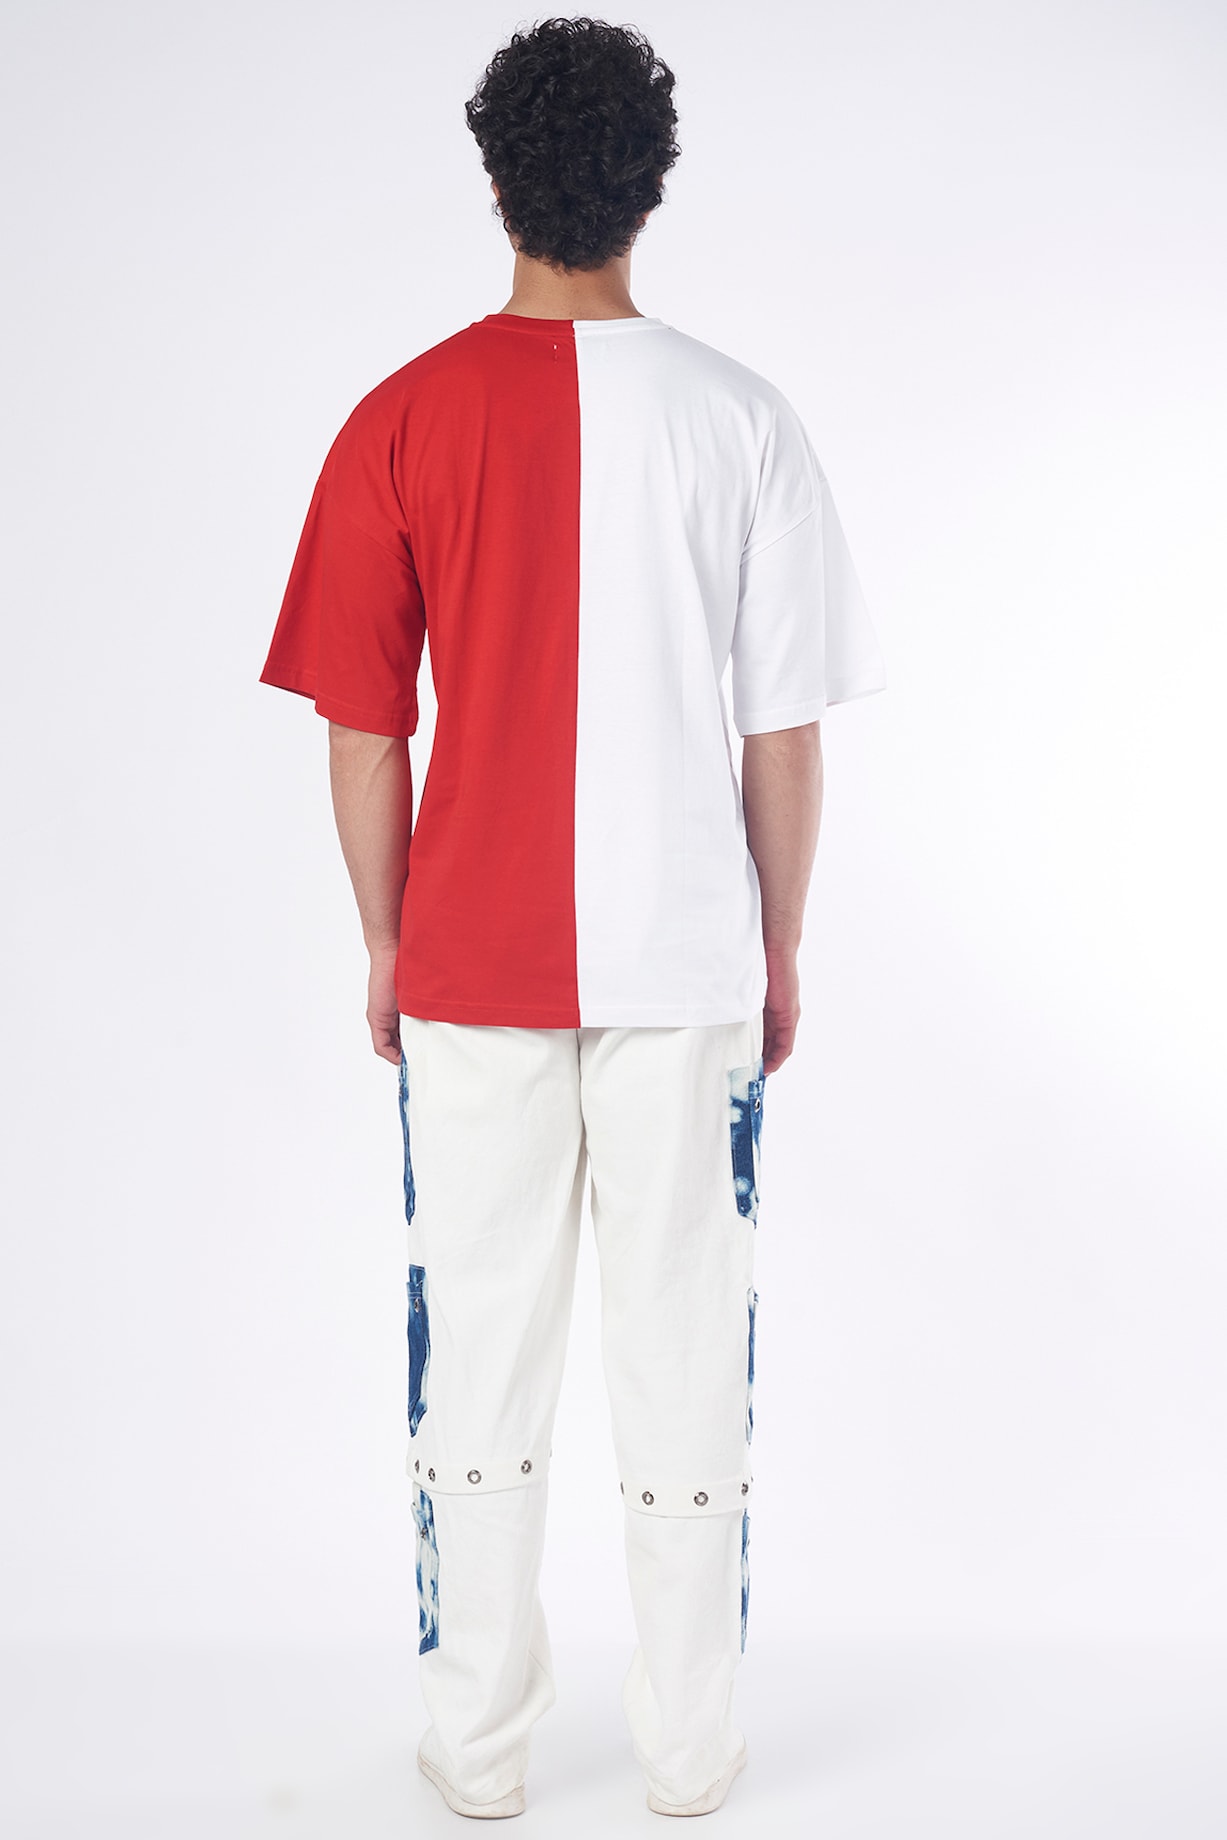 Red & White Cotton Half-Half T-shirt by RISING AMONG